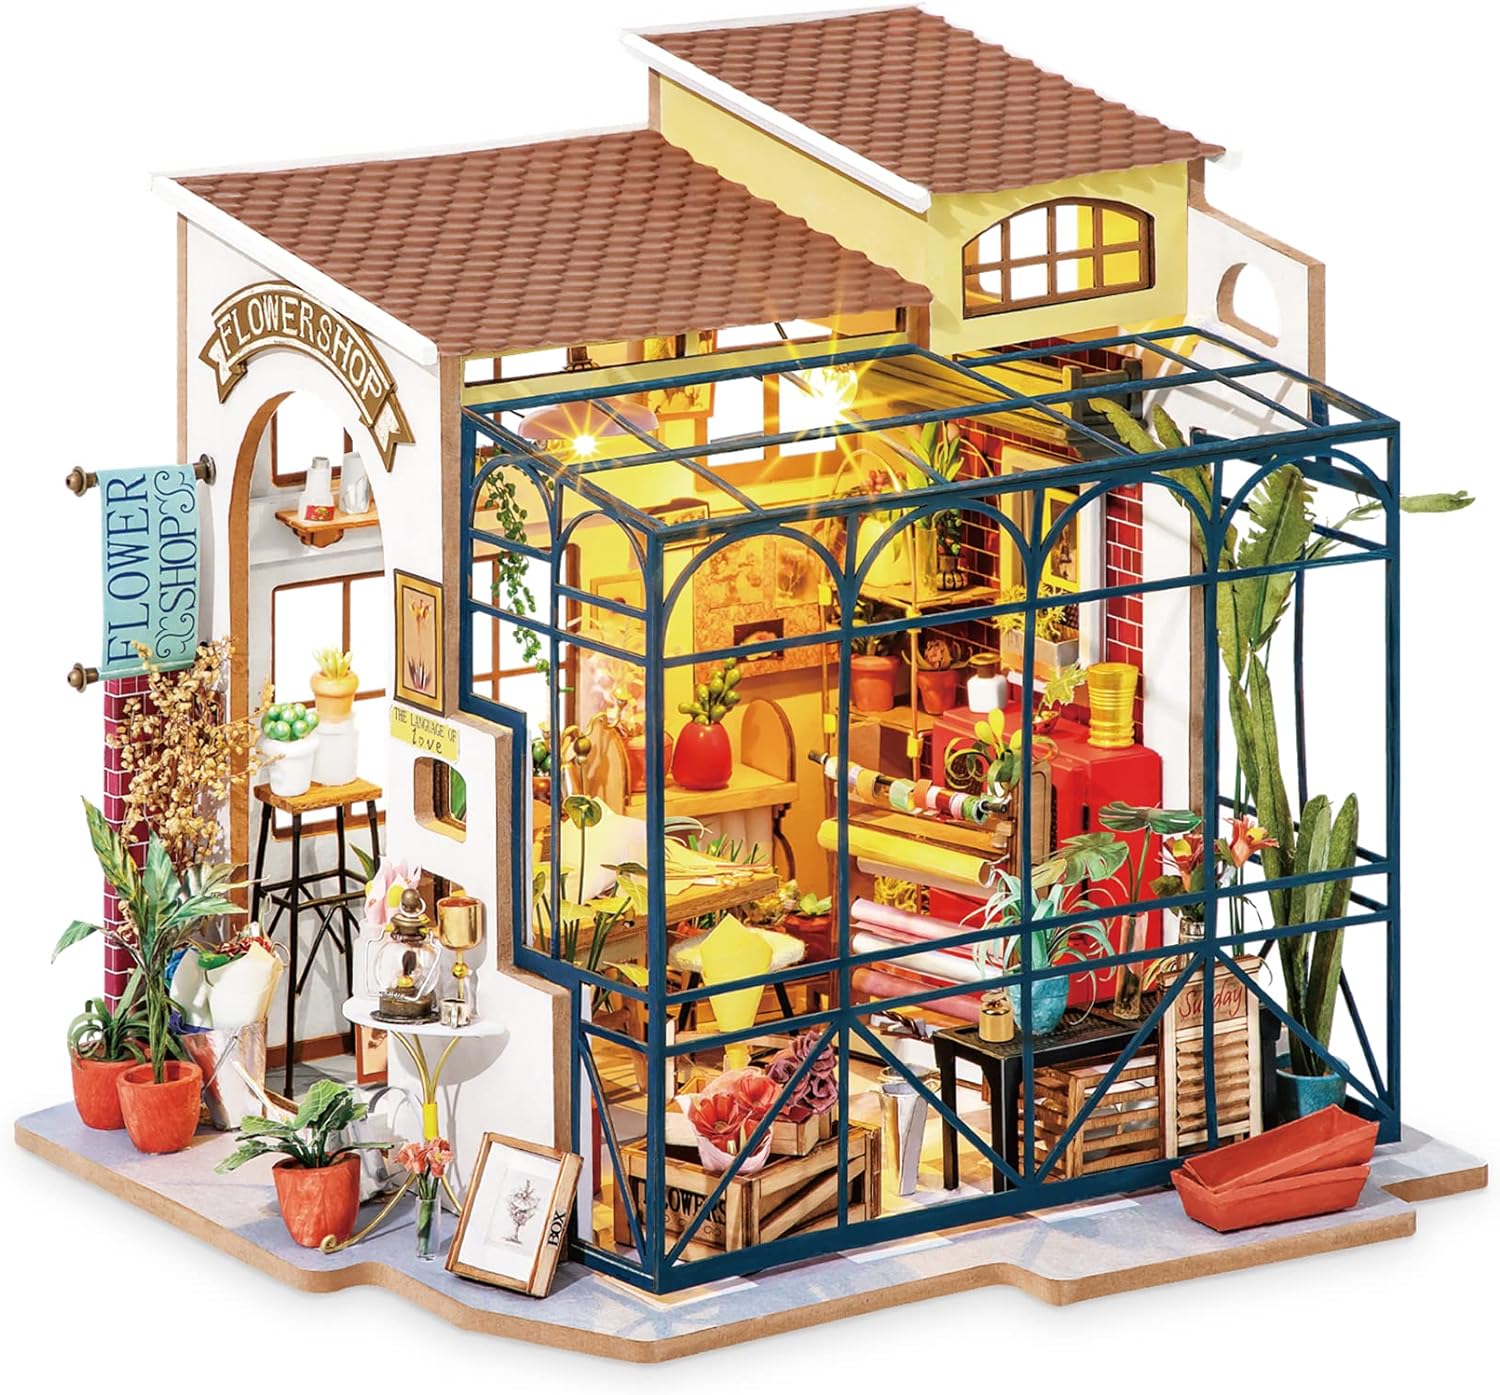 ROBOTIME DIY Dollhouse Kit Mini House with Furnitures Accessories 1:24 Scale Craft Kit - Emily' Flower Shop